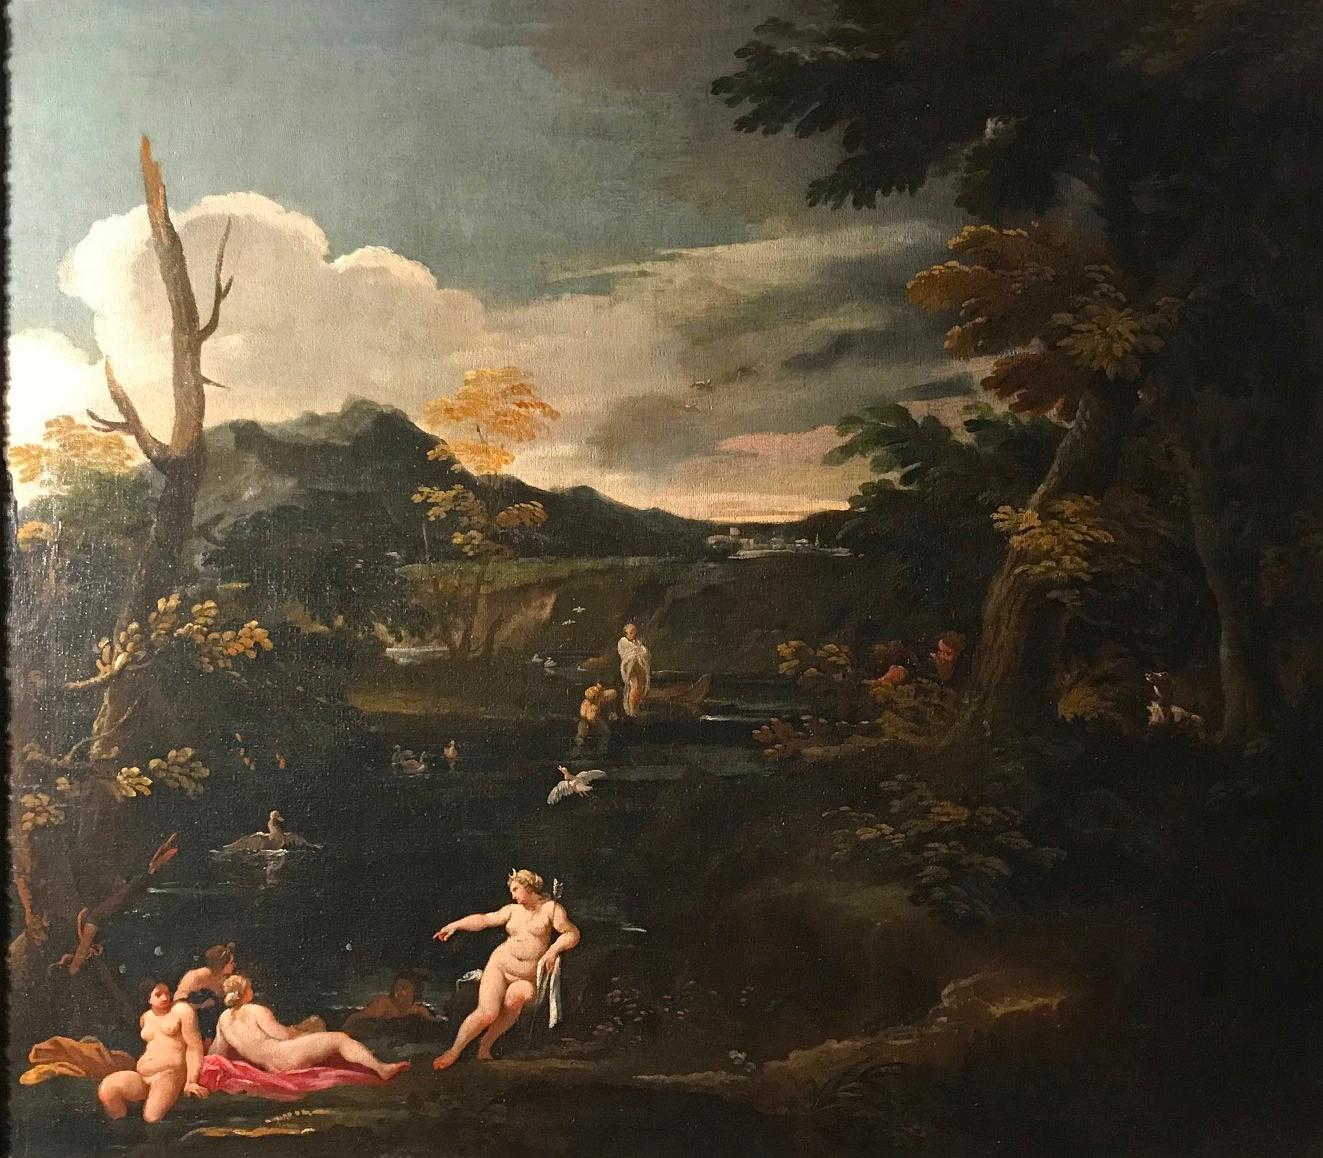 the story of actaeon